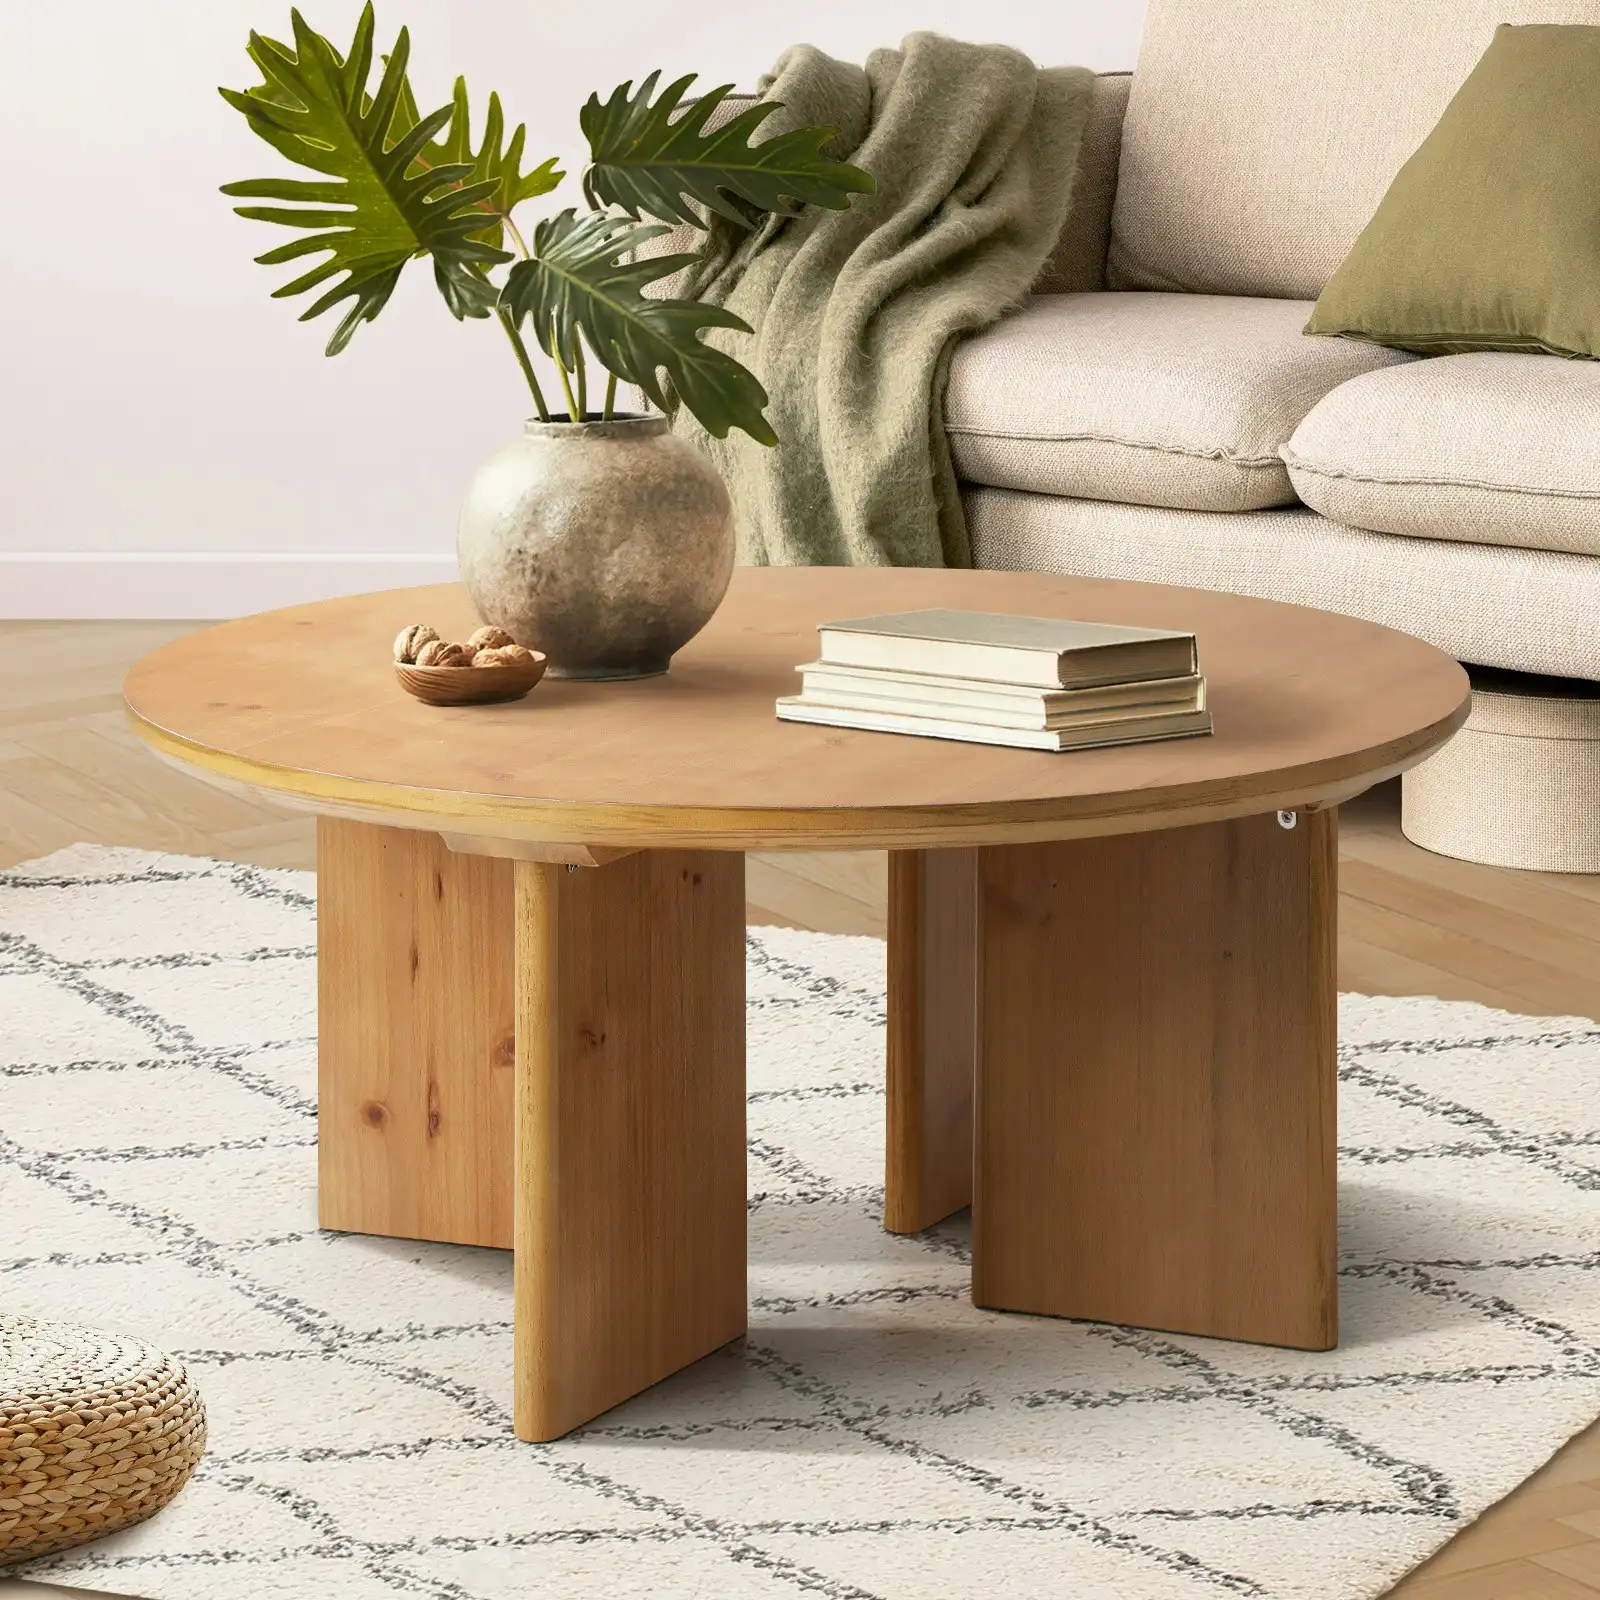 Oikiture Coffee Table Round Side End Tables Sofa Cafe Desk Wooden Natural